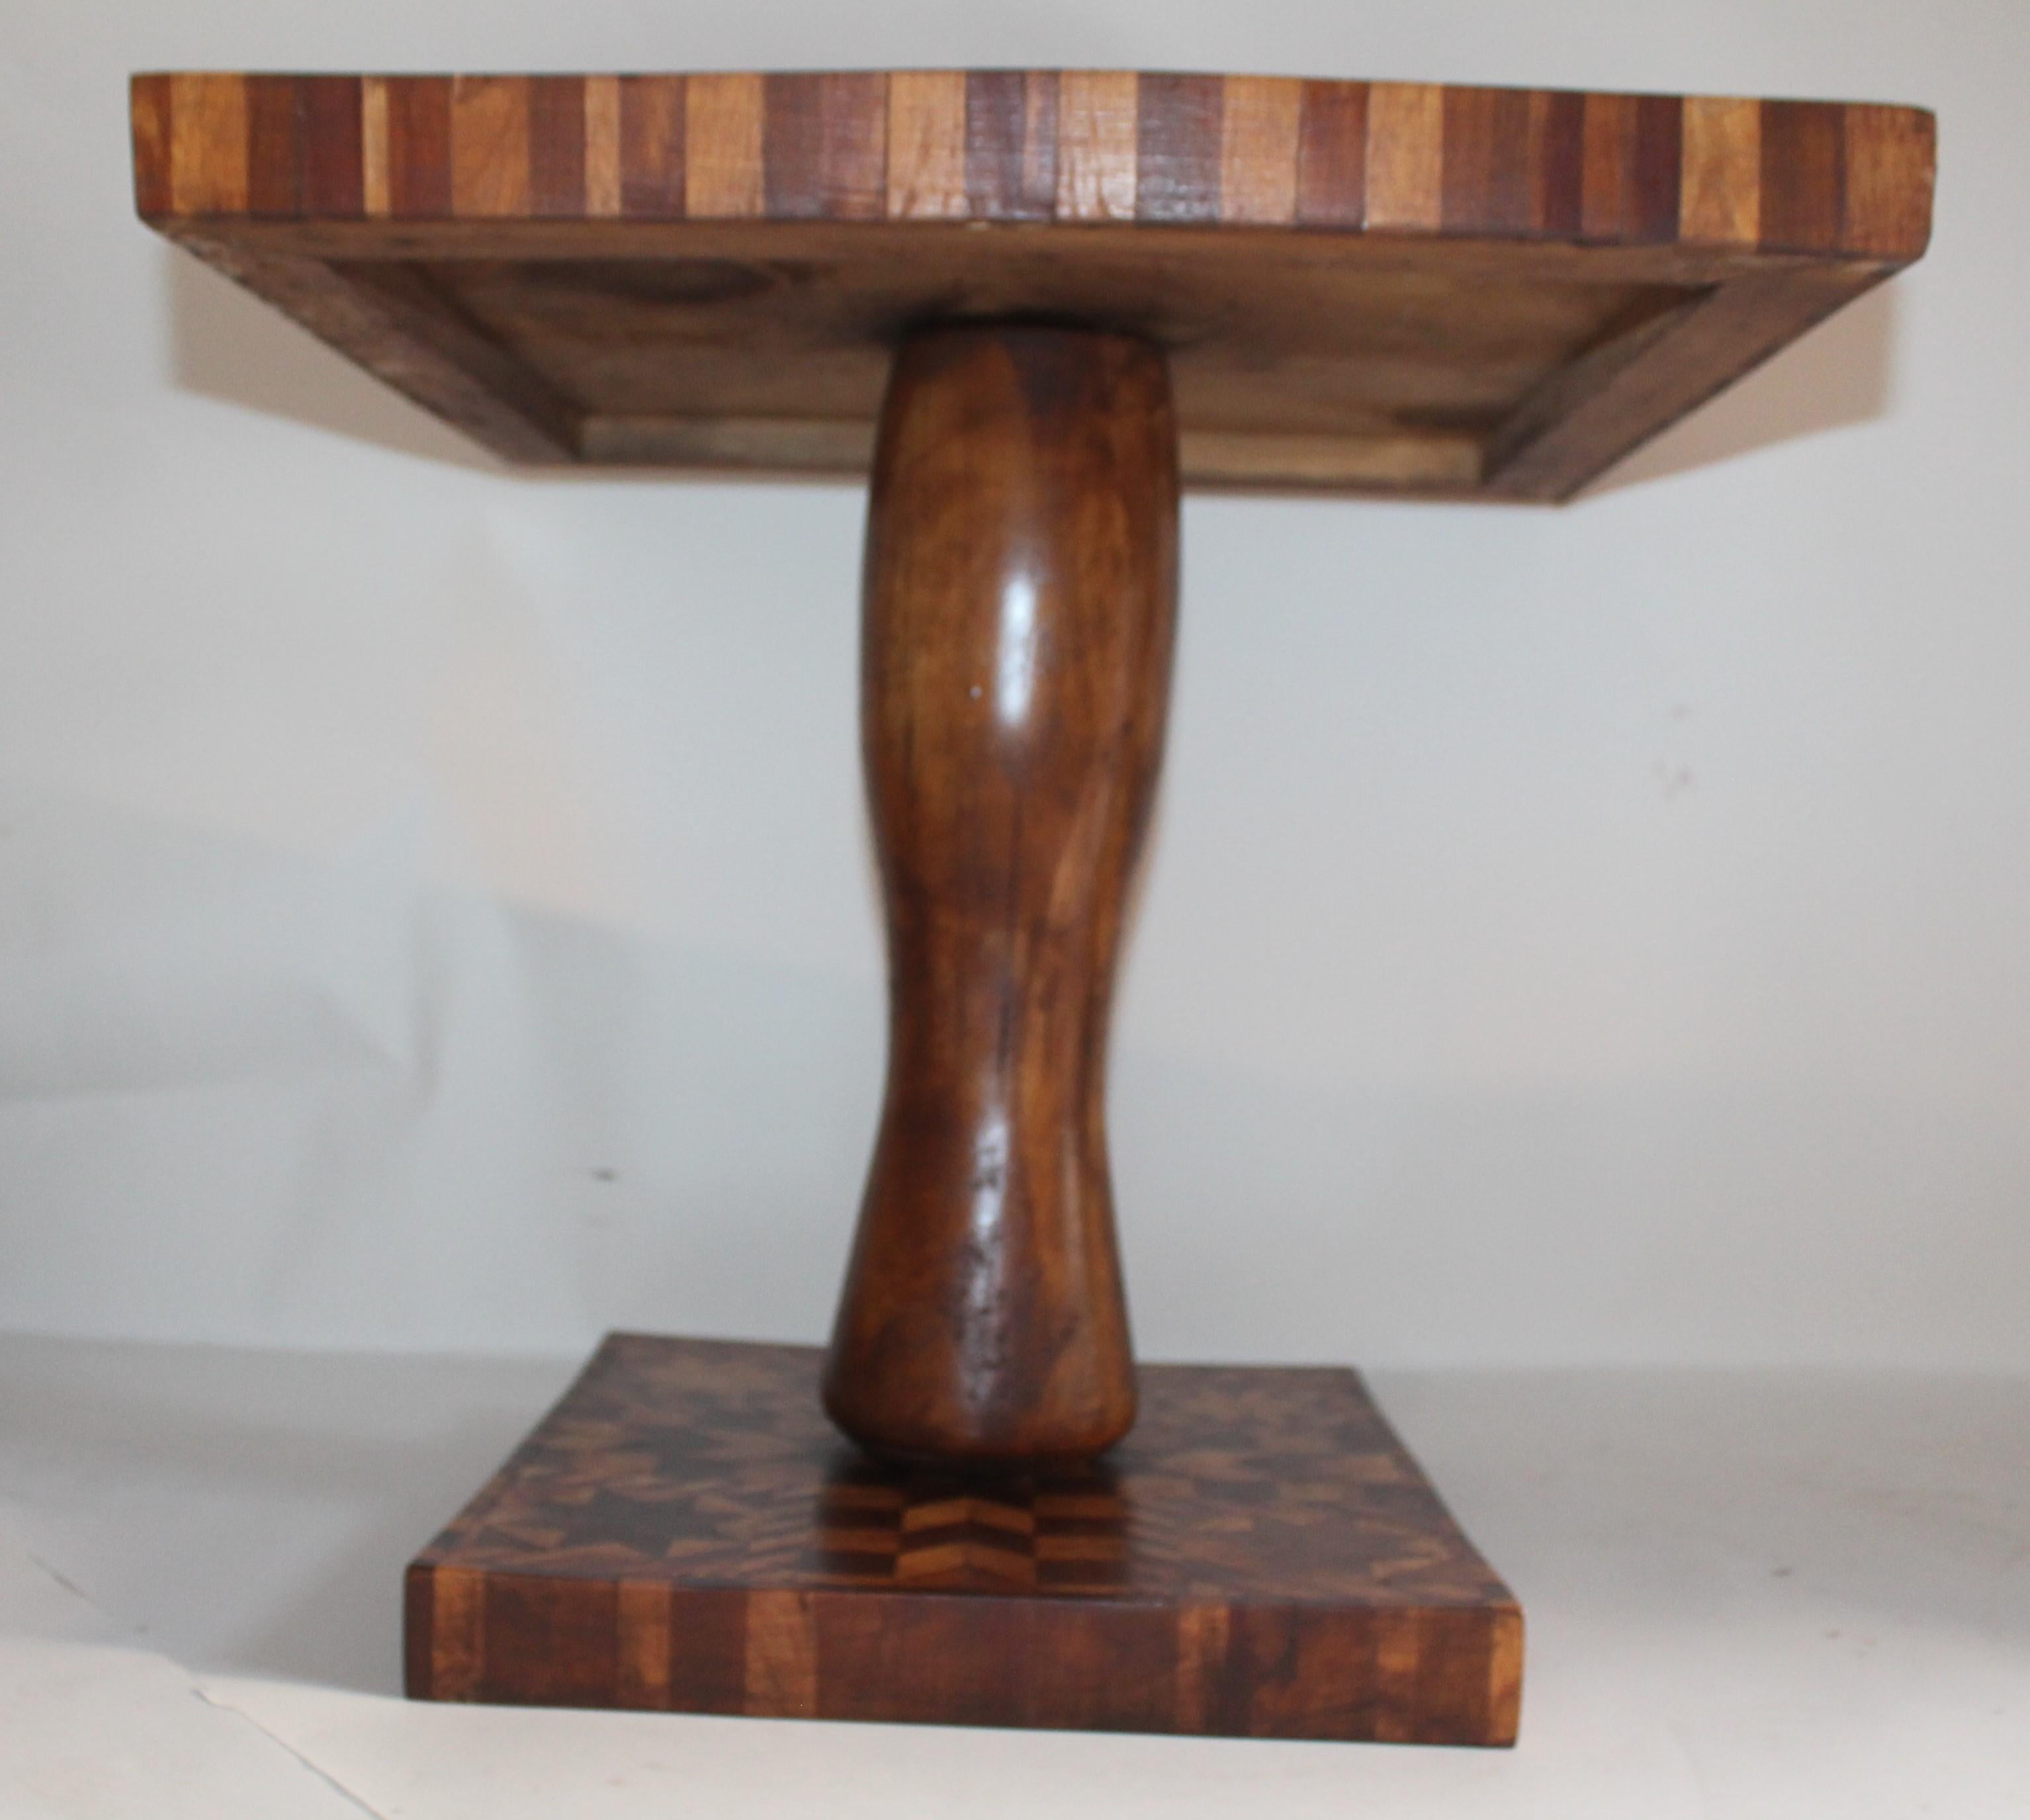 Hand-Crafted Inlaid Folk Art Side Table